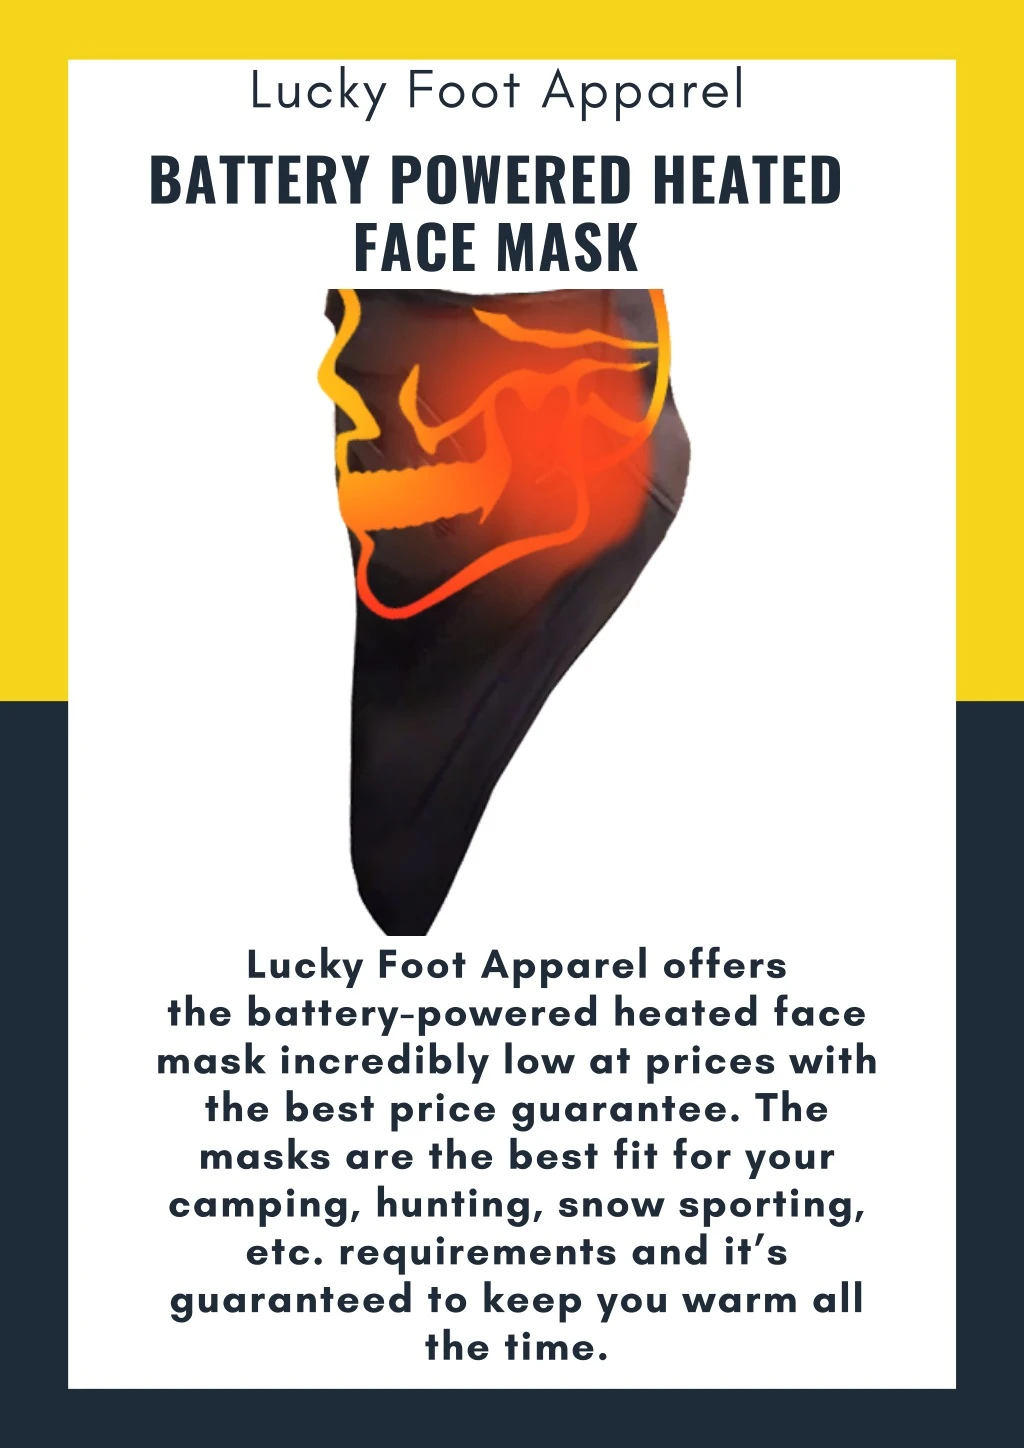 lucky foot apparel battery powered heated face